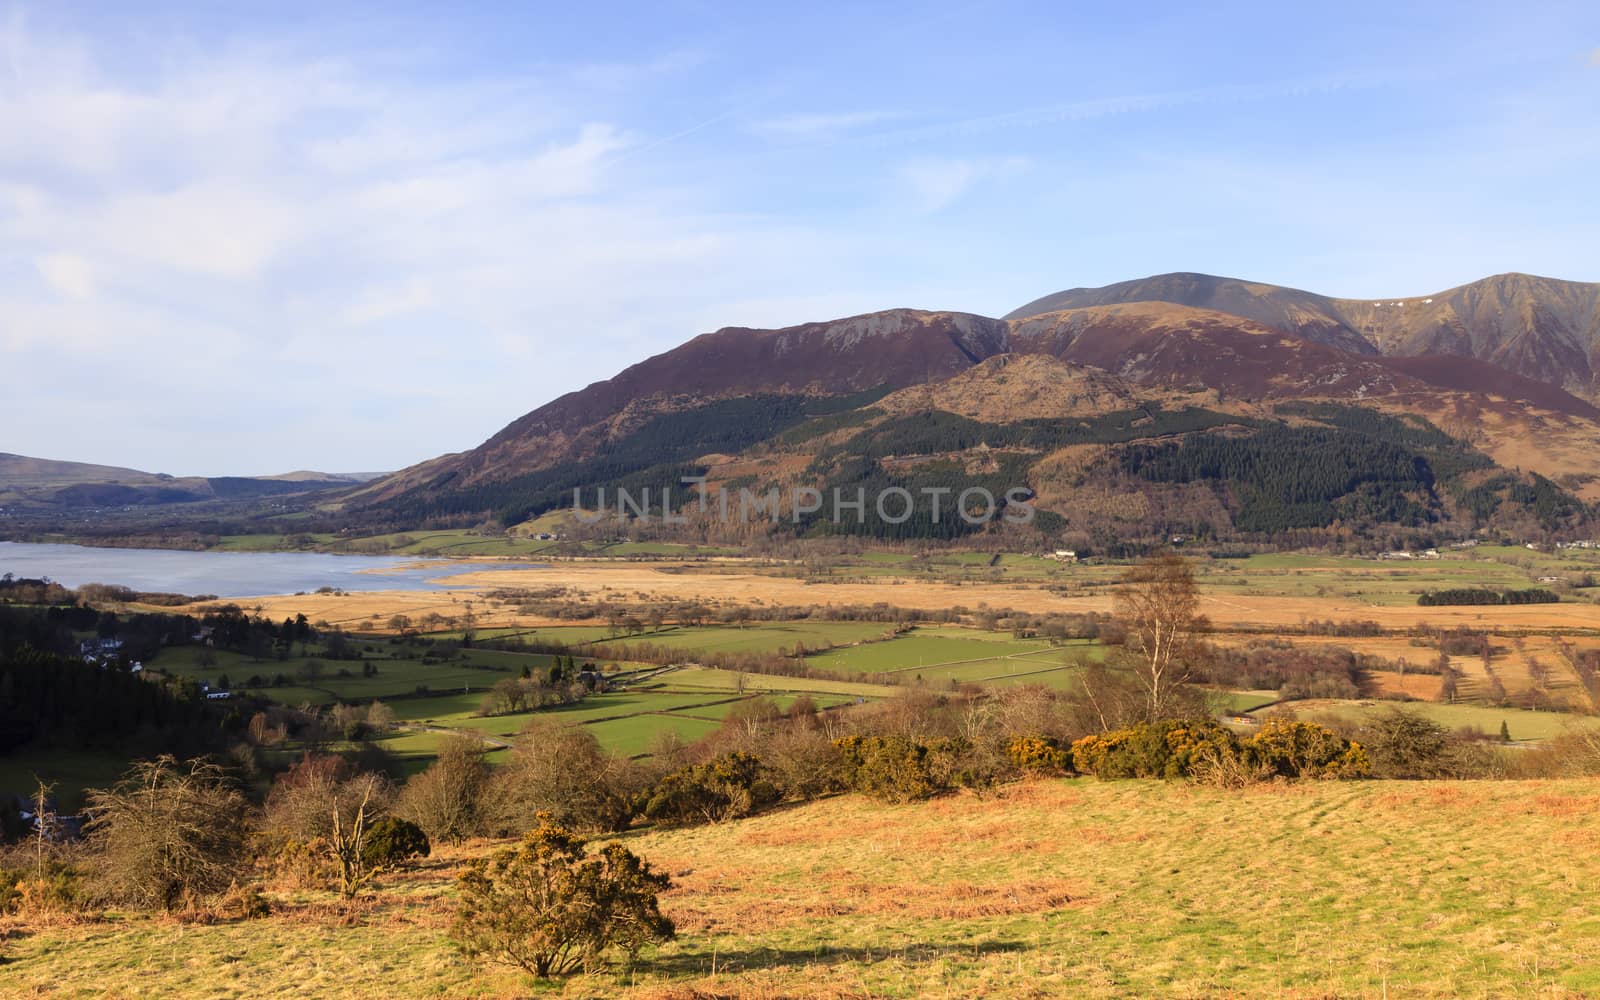 A view of Bassenthwaite lake in the English Lake District national park with Skiddaw mountain in the background.  Skiddaw is the fourth highest mountain in England.